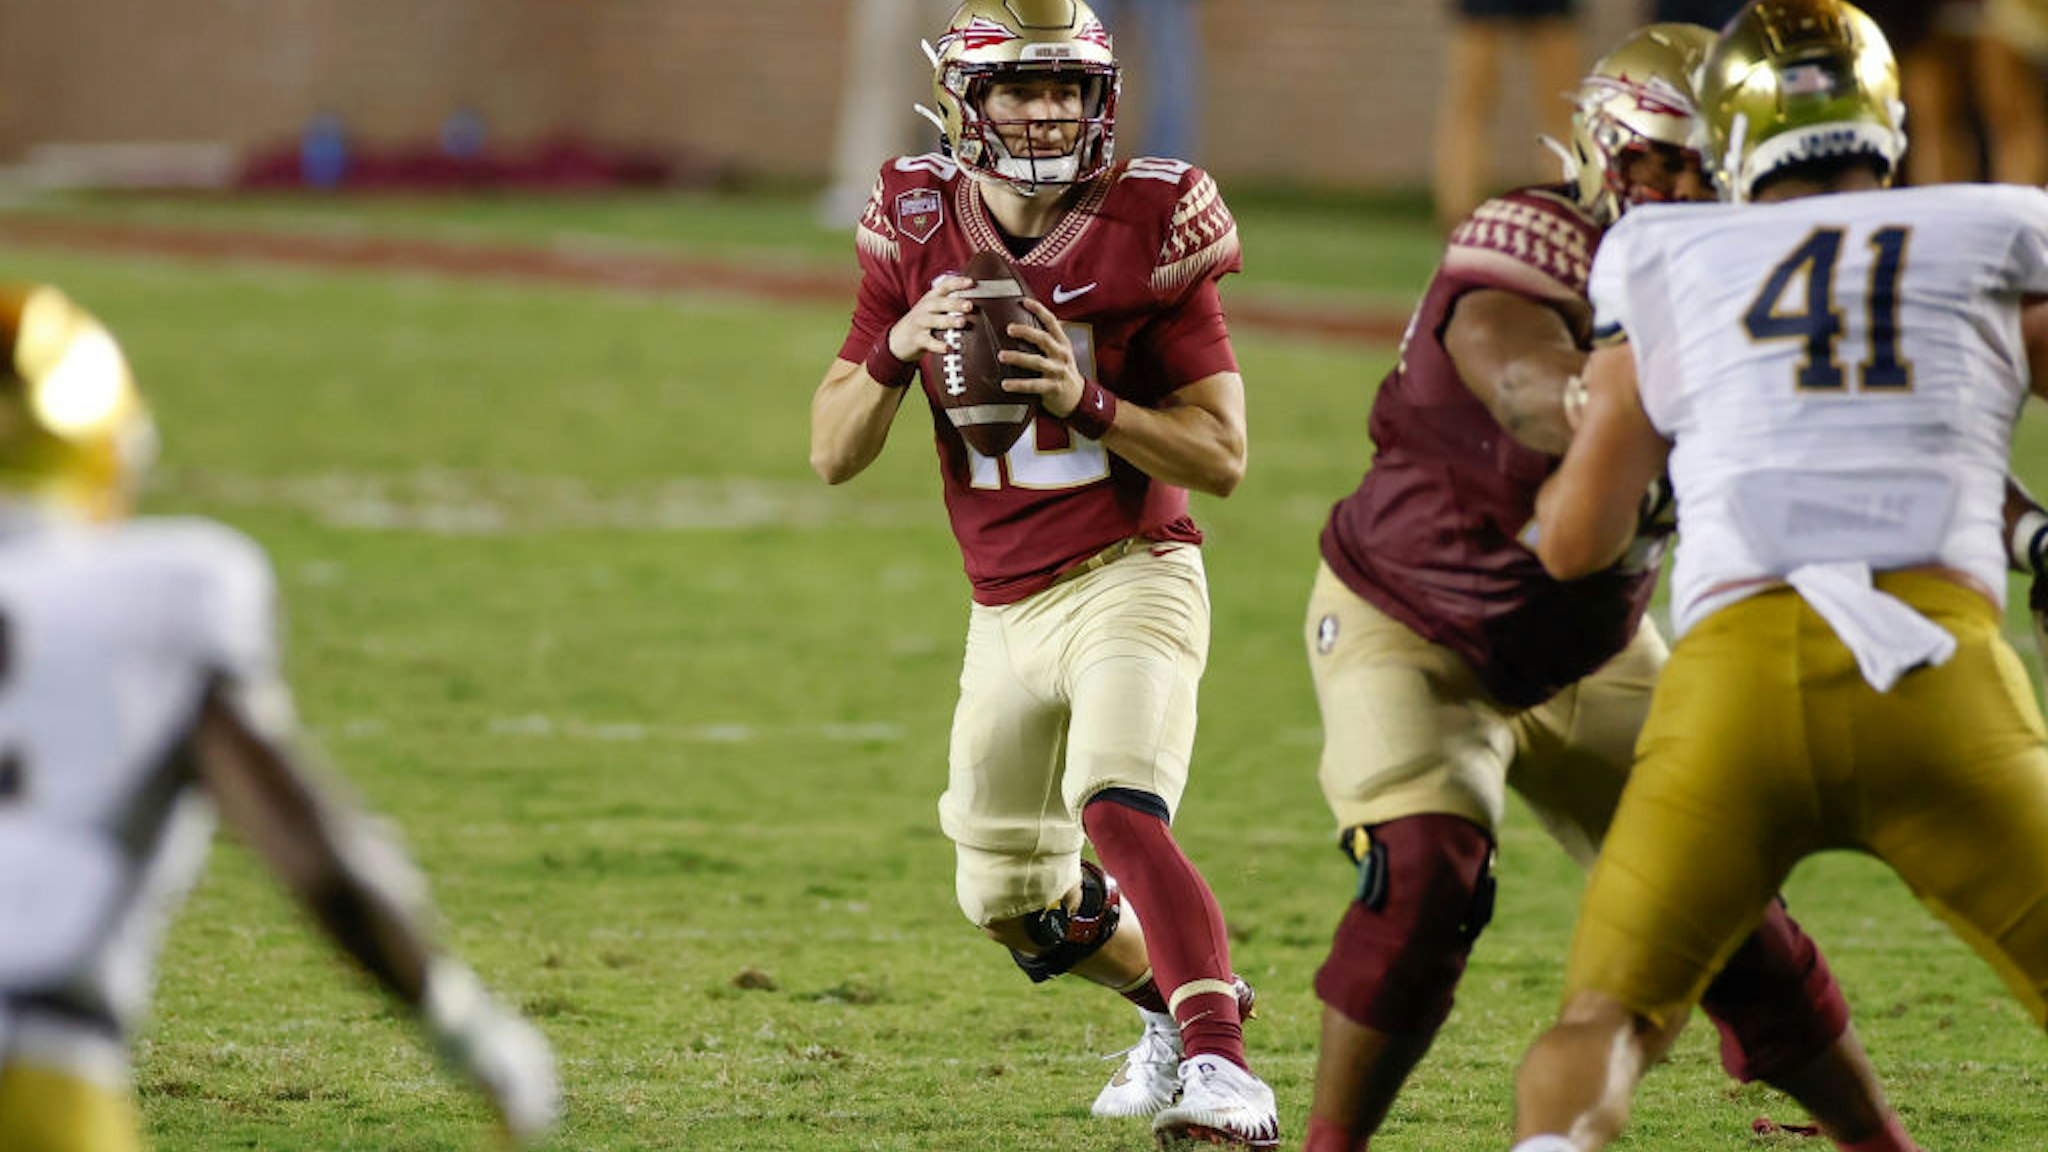 TALLAHASSEE, FL - SEPTEMBER 05: Florida State Seminoles quarterback McKenzie Milton (10) during the game between the Notre Dame Fighting Irish and the Florida State Seminoles on September 5, 2021 at Bobby Bowden Field at Doak Campbell Stadium in Tallahassee, Fl. (Photo by David Rosenblum/Icon Sportswire via Getty Images)